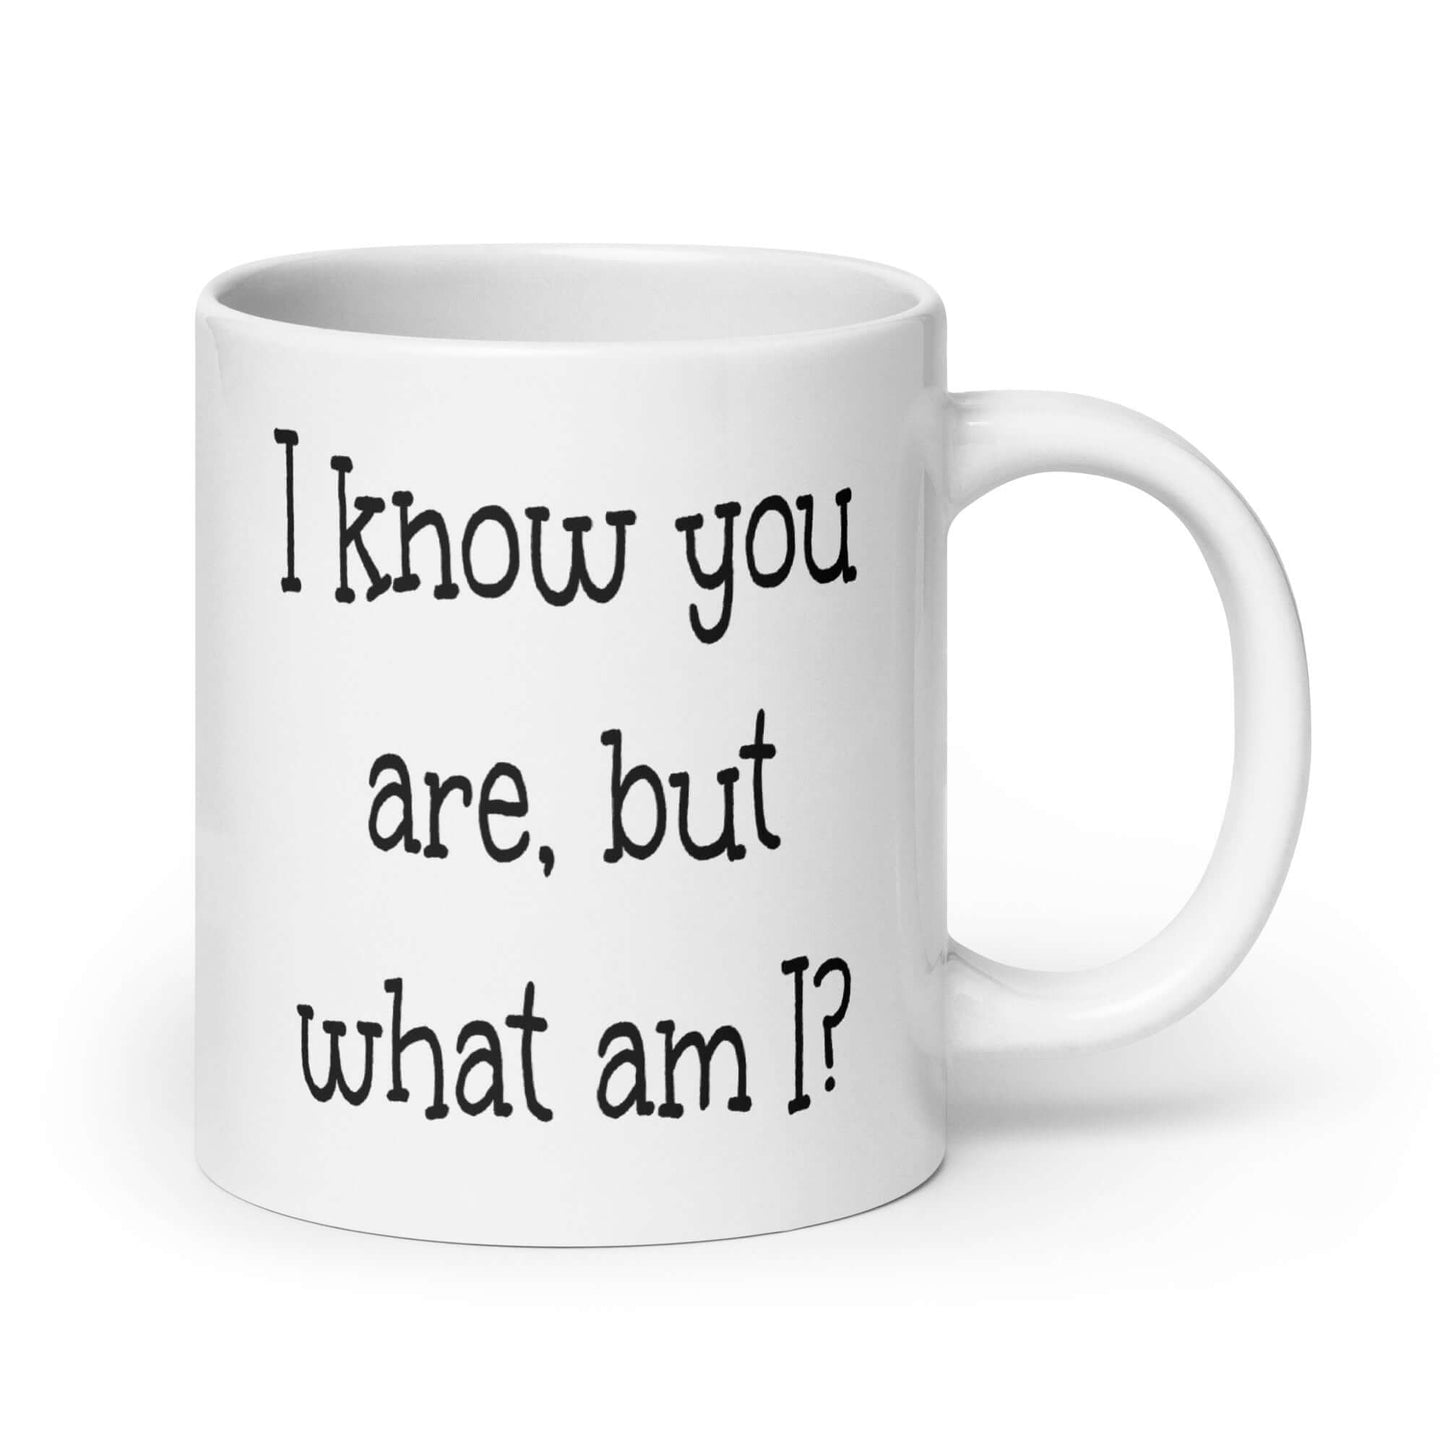 I know you are but what am I funny childish humor mug